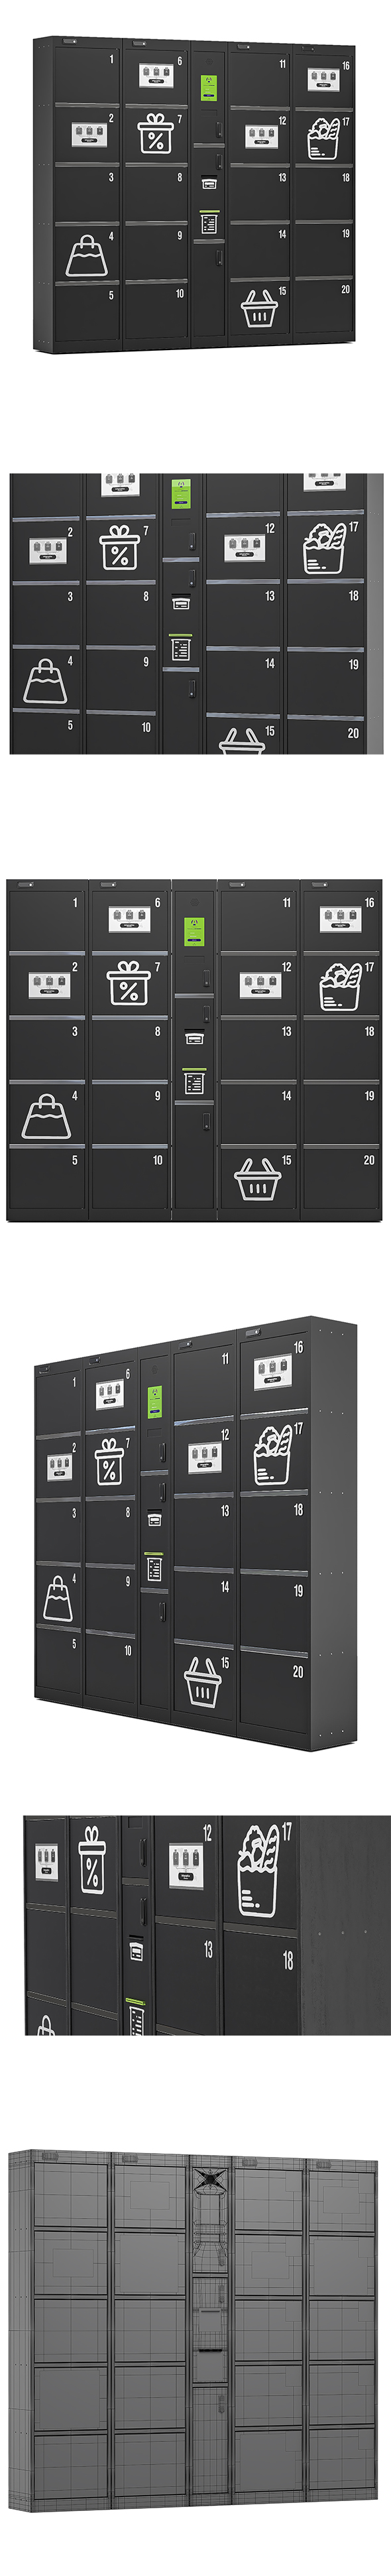 [DOWNLOAD]Automatic Luggage Storage